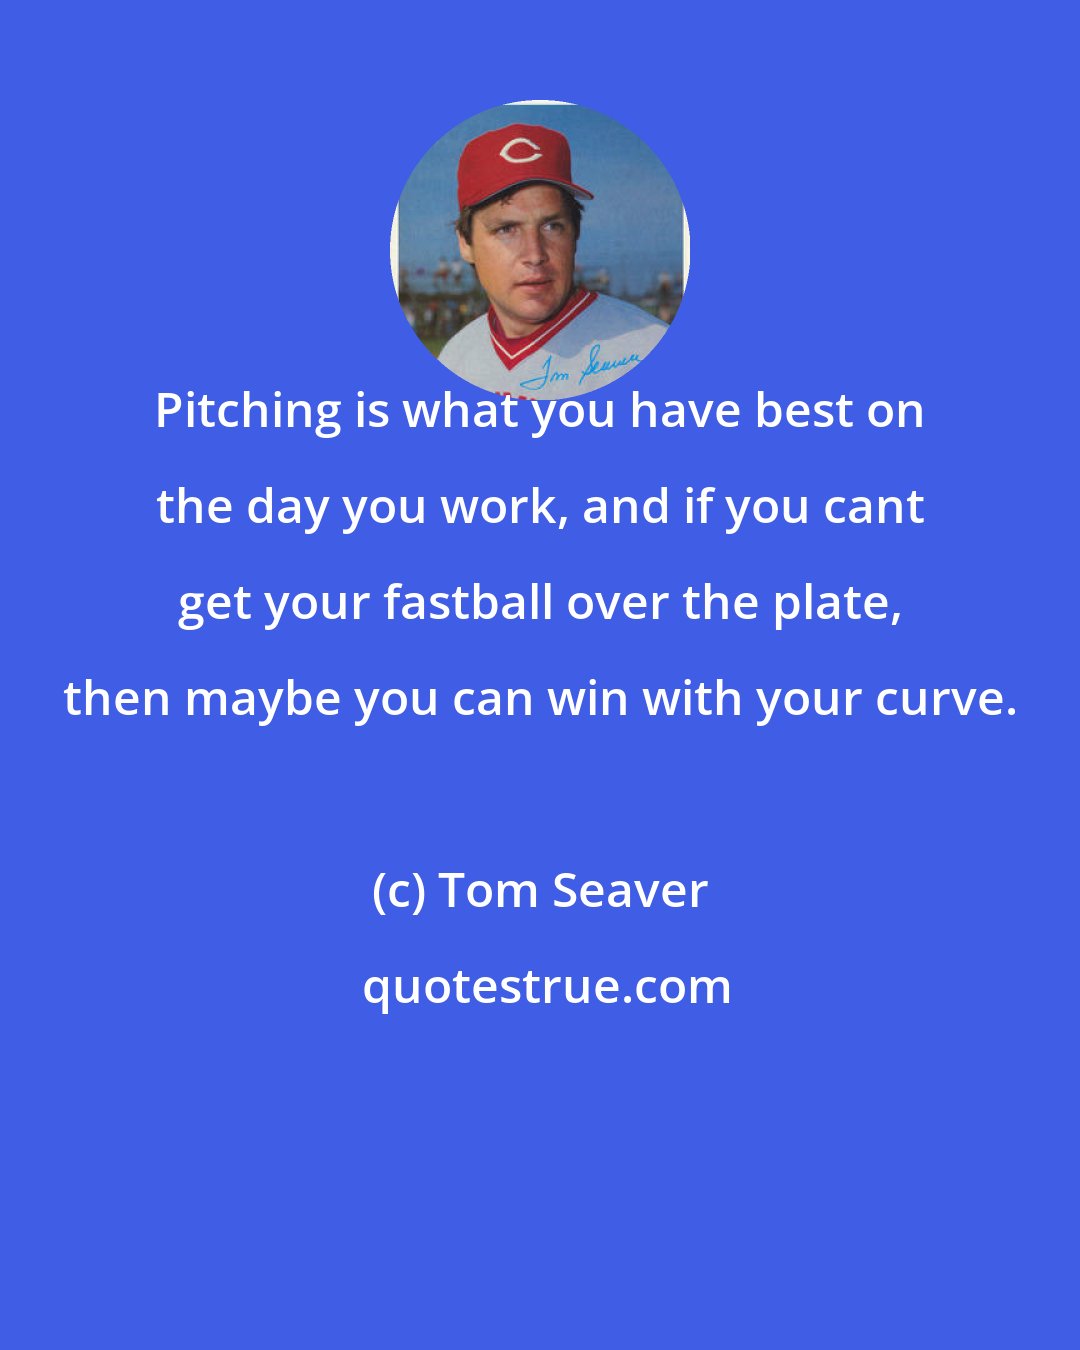 Tom Seaver: Pitching is what you have best on the day you work, and if you cant get your fastball over the plate, then maybe you can win with your curve.